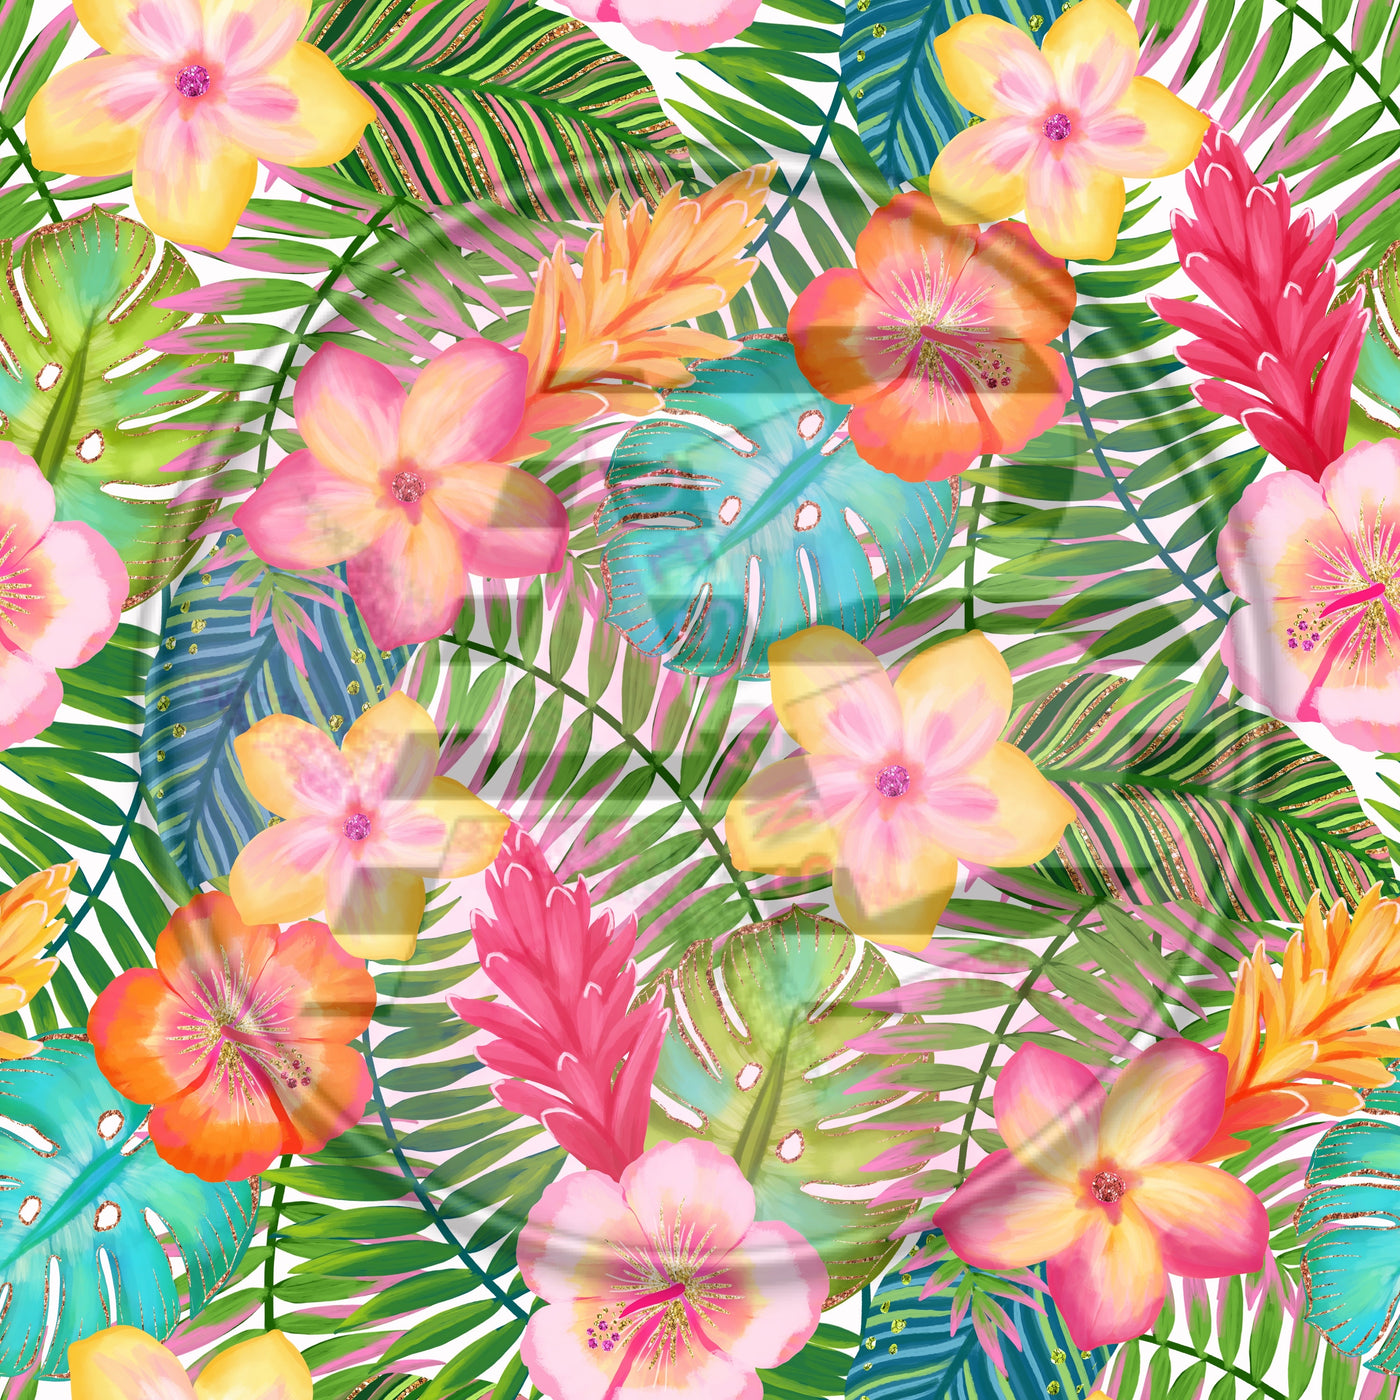 Adhesive Patterned Vinyl - Tropical 199